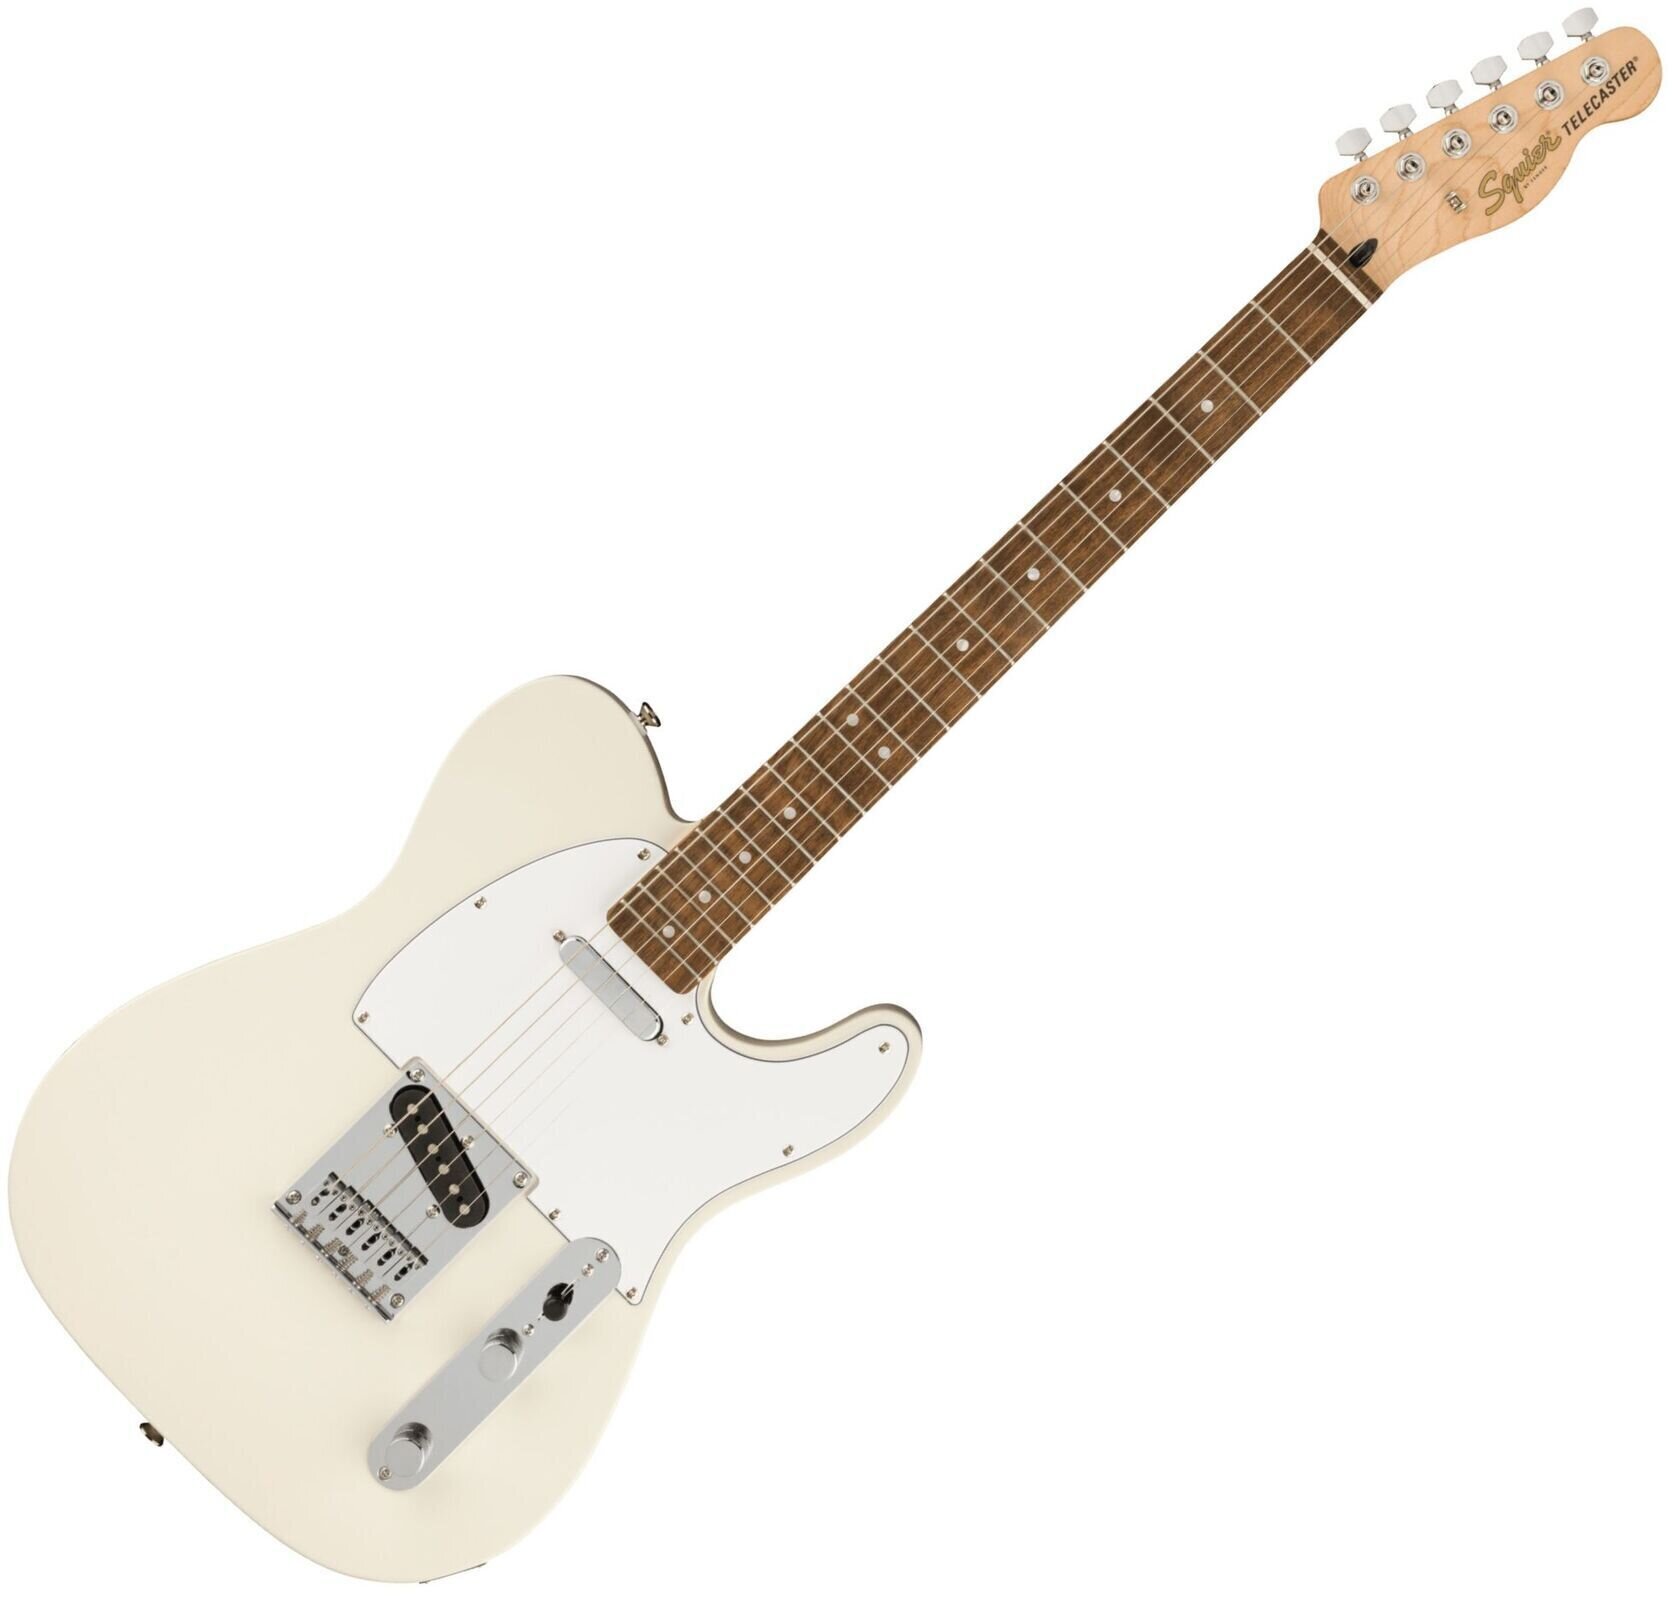 Electric guitar Fender Squier Affinity Series Telecaster LRL WPG Olympic White